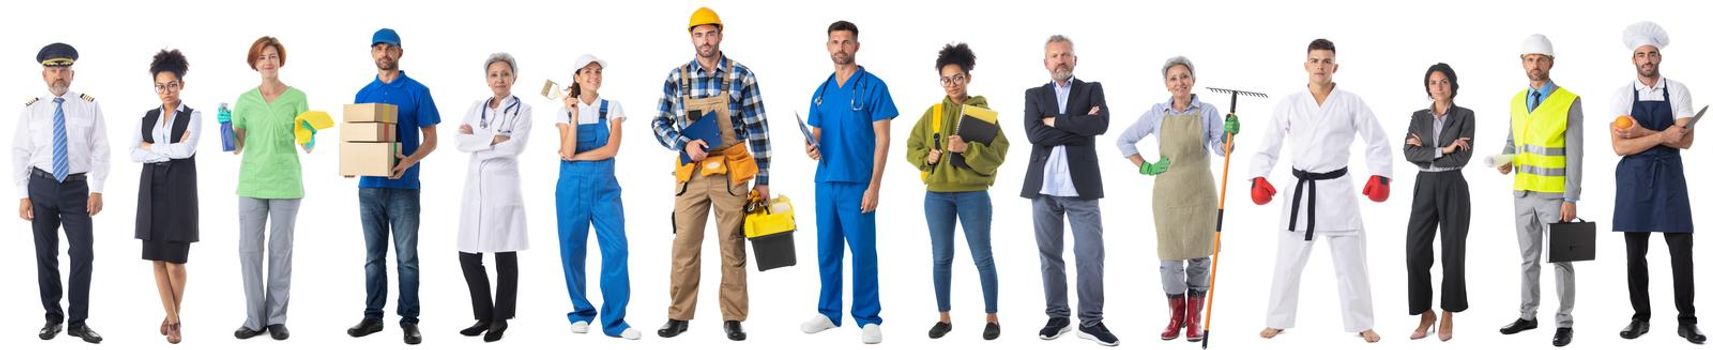 Set of full length portraits of group of people representing diverse professions of business, medicine, construction industry etc